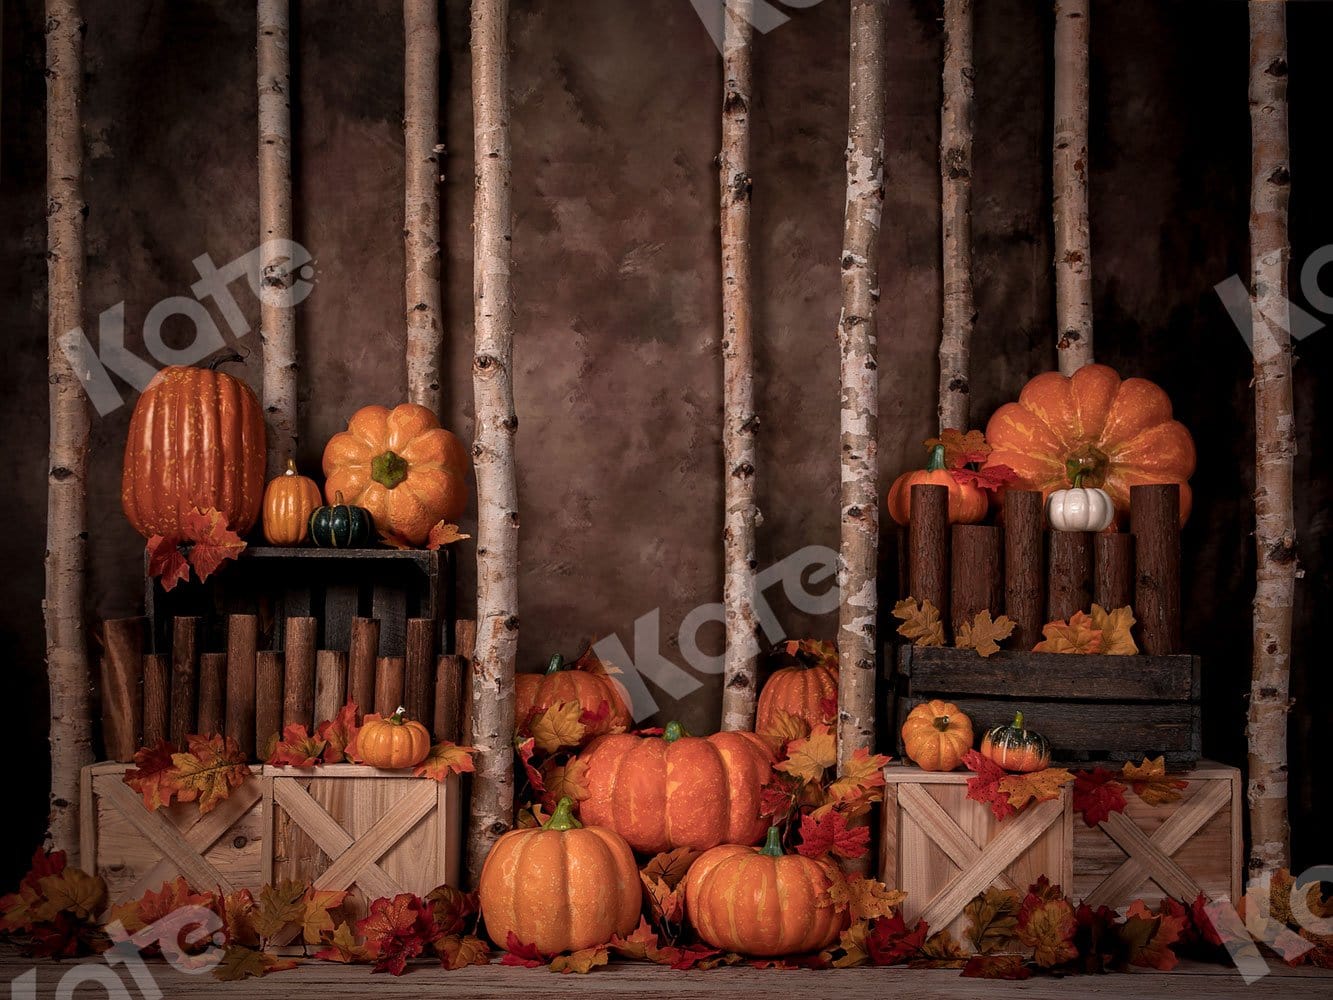 Kate Autumn/Thanksgiving Pumpkins Backdrop Designed by Jia Chan Photography